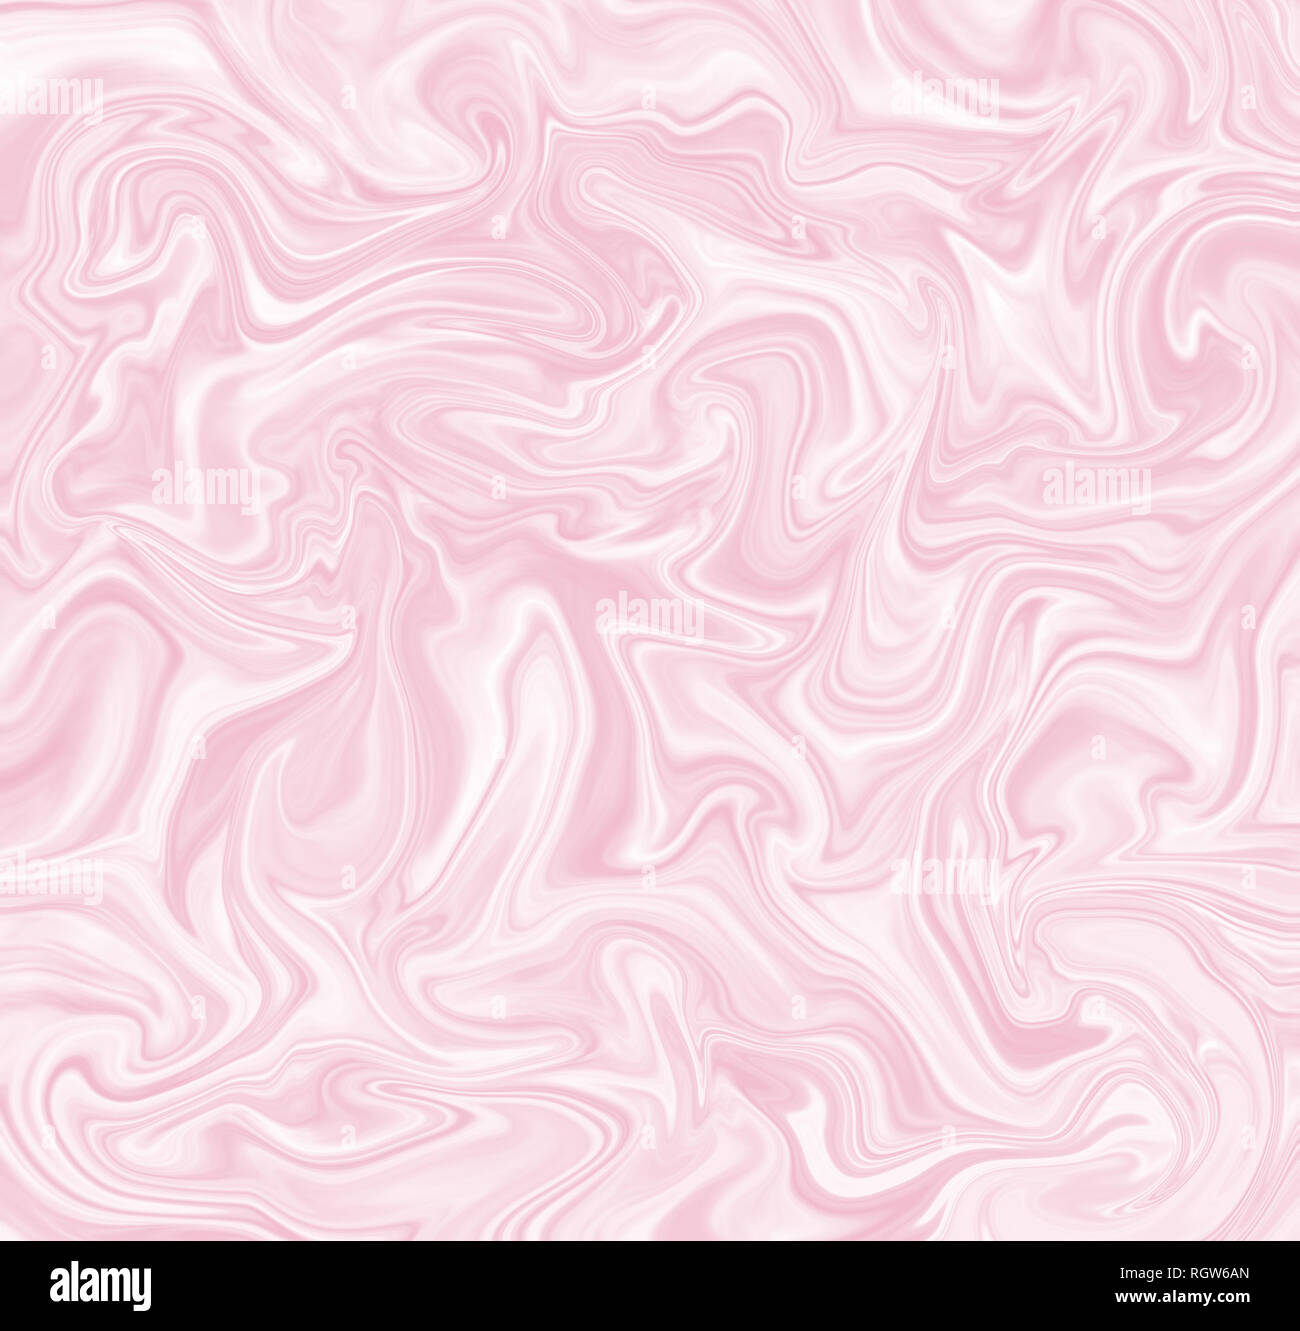 High resolution liquid marble texture design, light pink marbling satin or  silk-like surface. Vibrant abstract digital paint design background Stock  Photo - Alamy